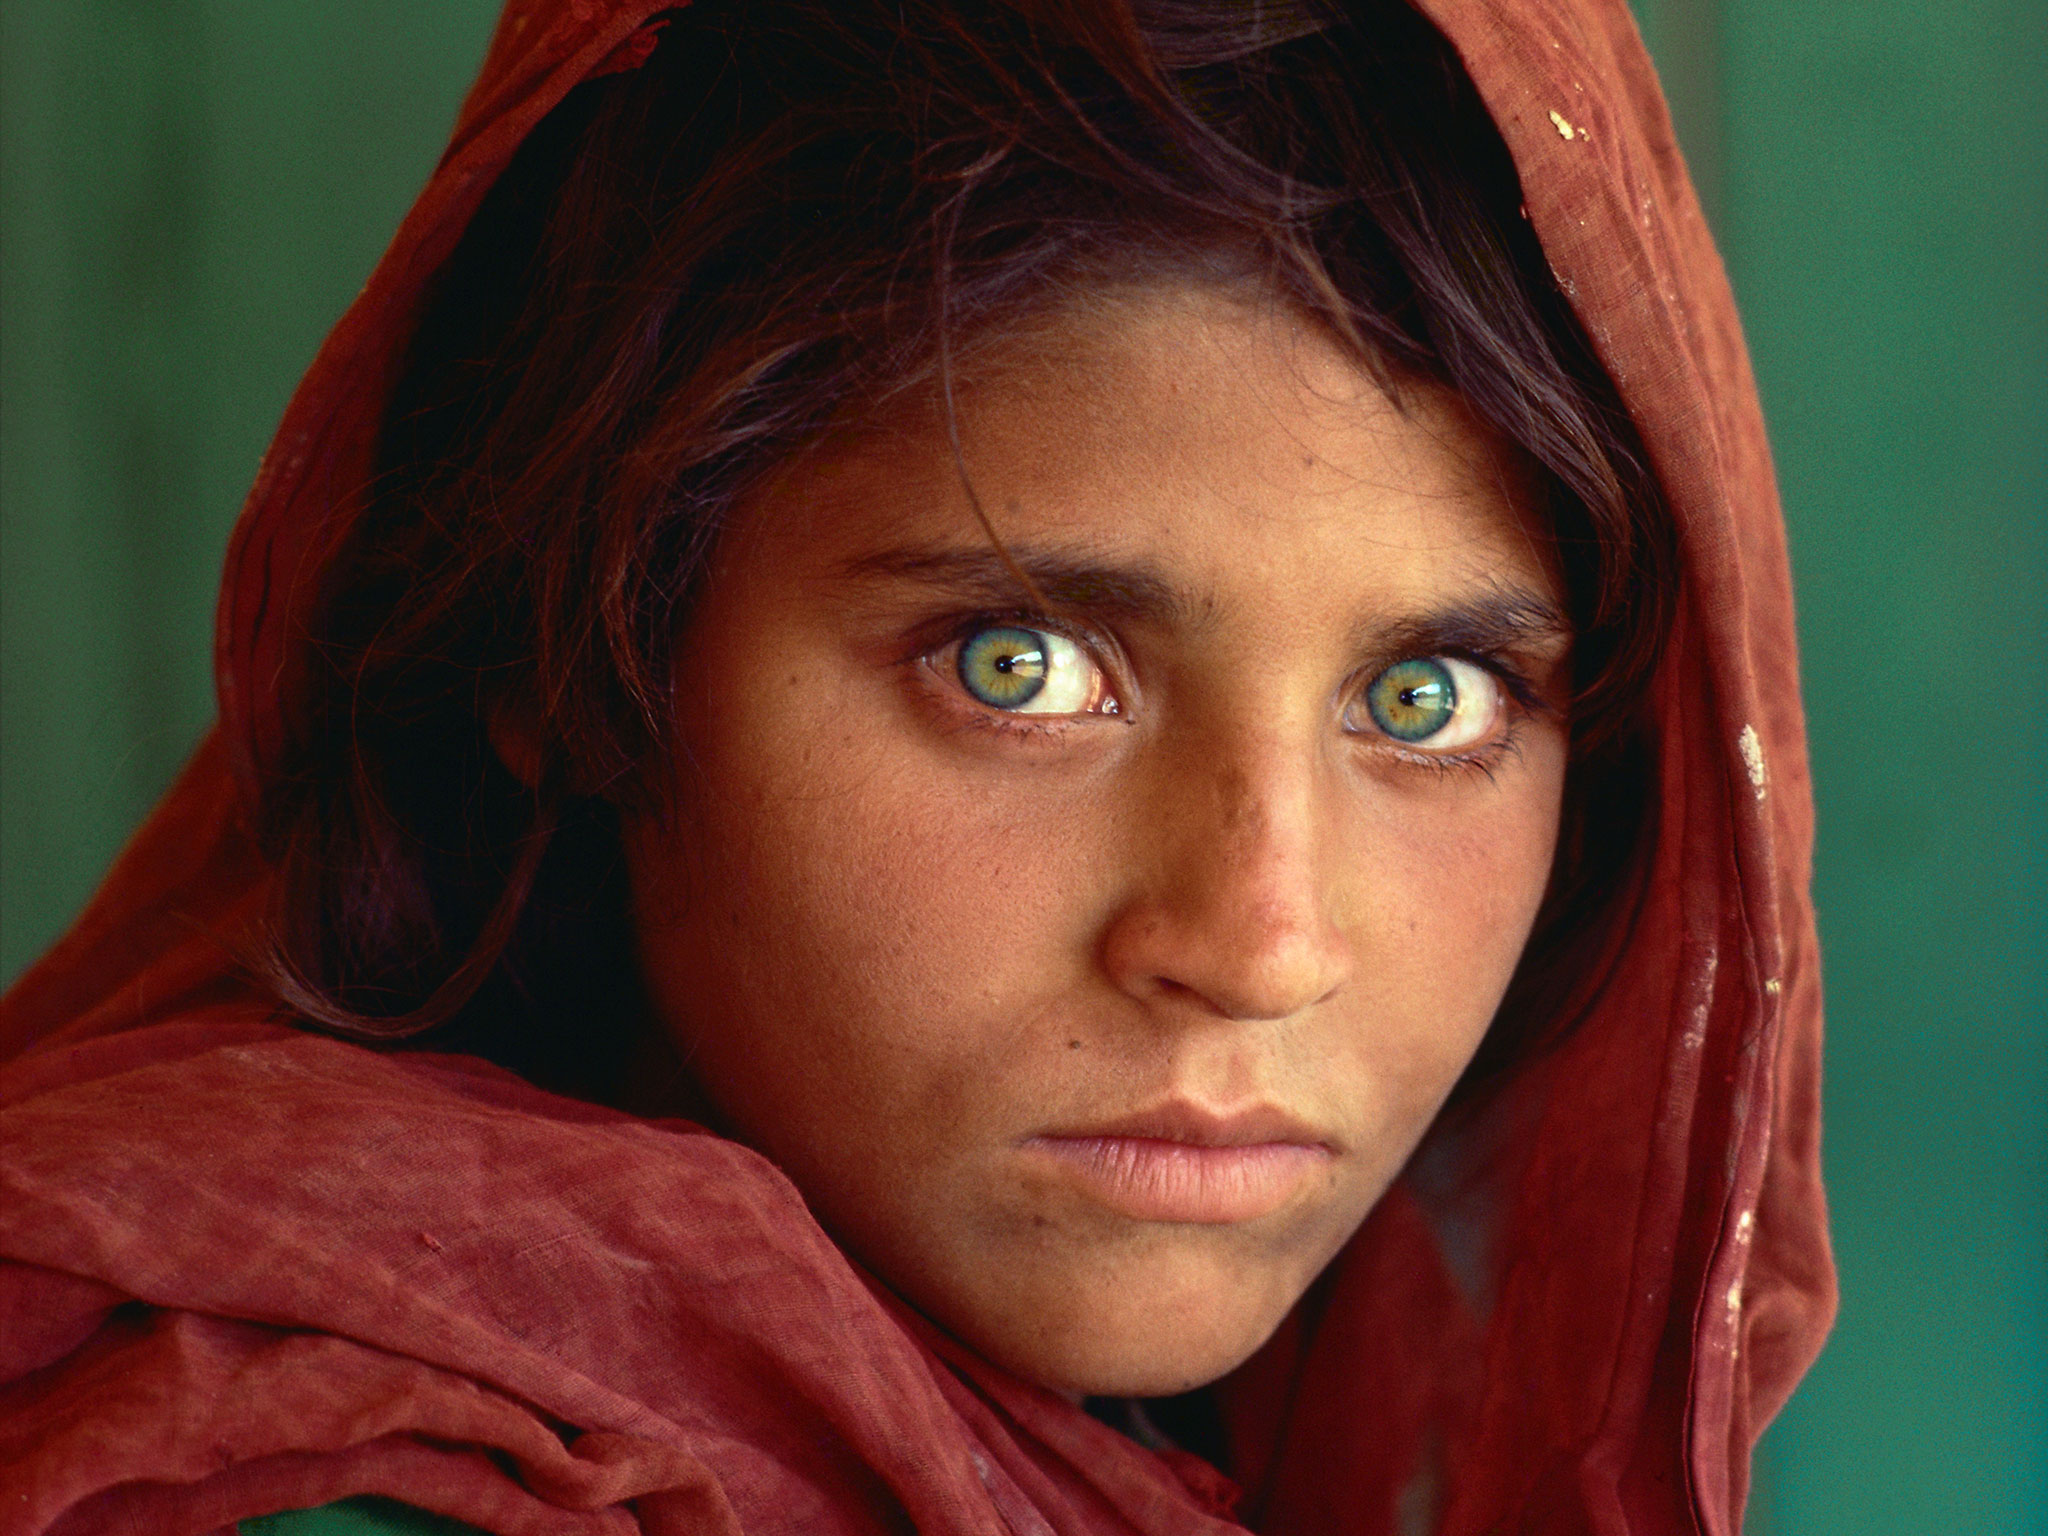 Afghan Girl - Taken by Steve McCurry during the Soviet occupation of Afghanistan, this transfixing image depicts a refugee from the war and was used for the cover the June 1985 issue of National Geographic. The subject was only identified 17 years later as Sharbat Gula, and she had never actually seen her iconic portrait before McCurry managed to track her down in January 2002.